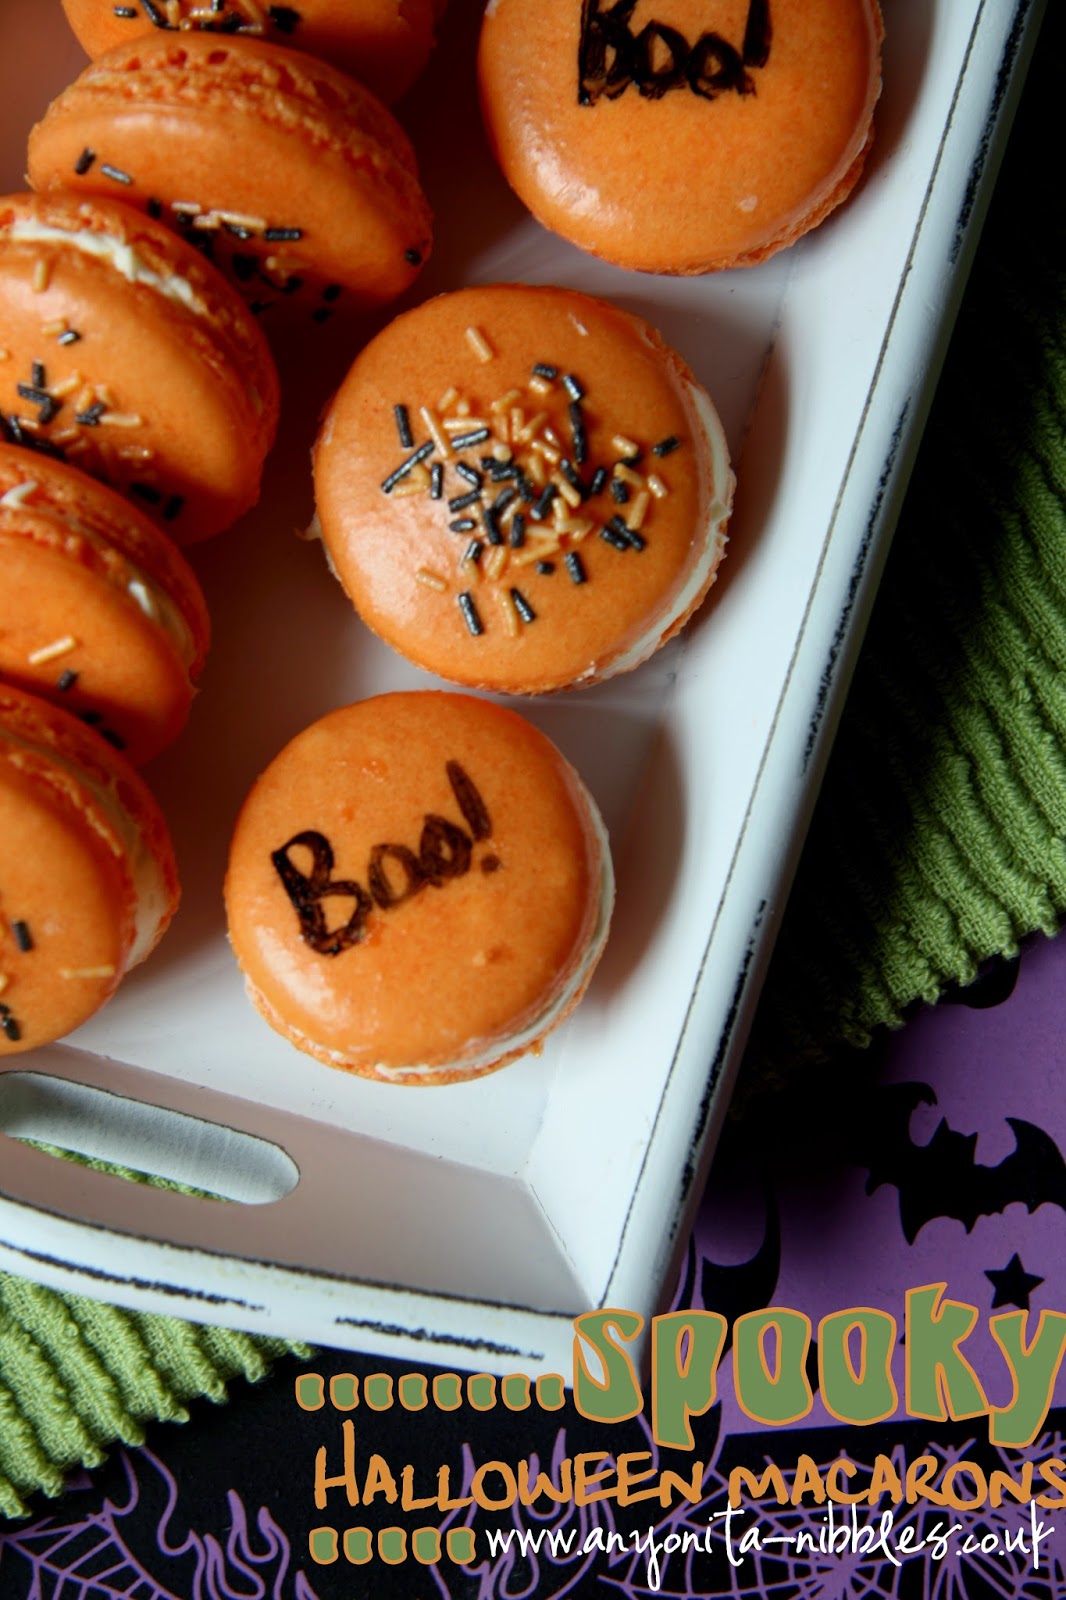 Spooky Halloween Macarons from Anyonita-nibbles.co.uk